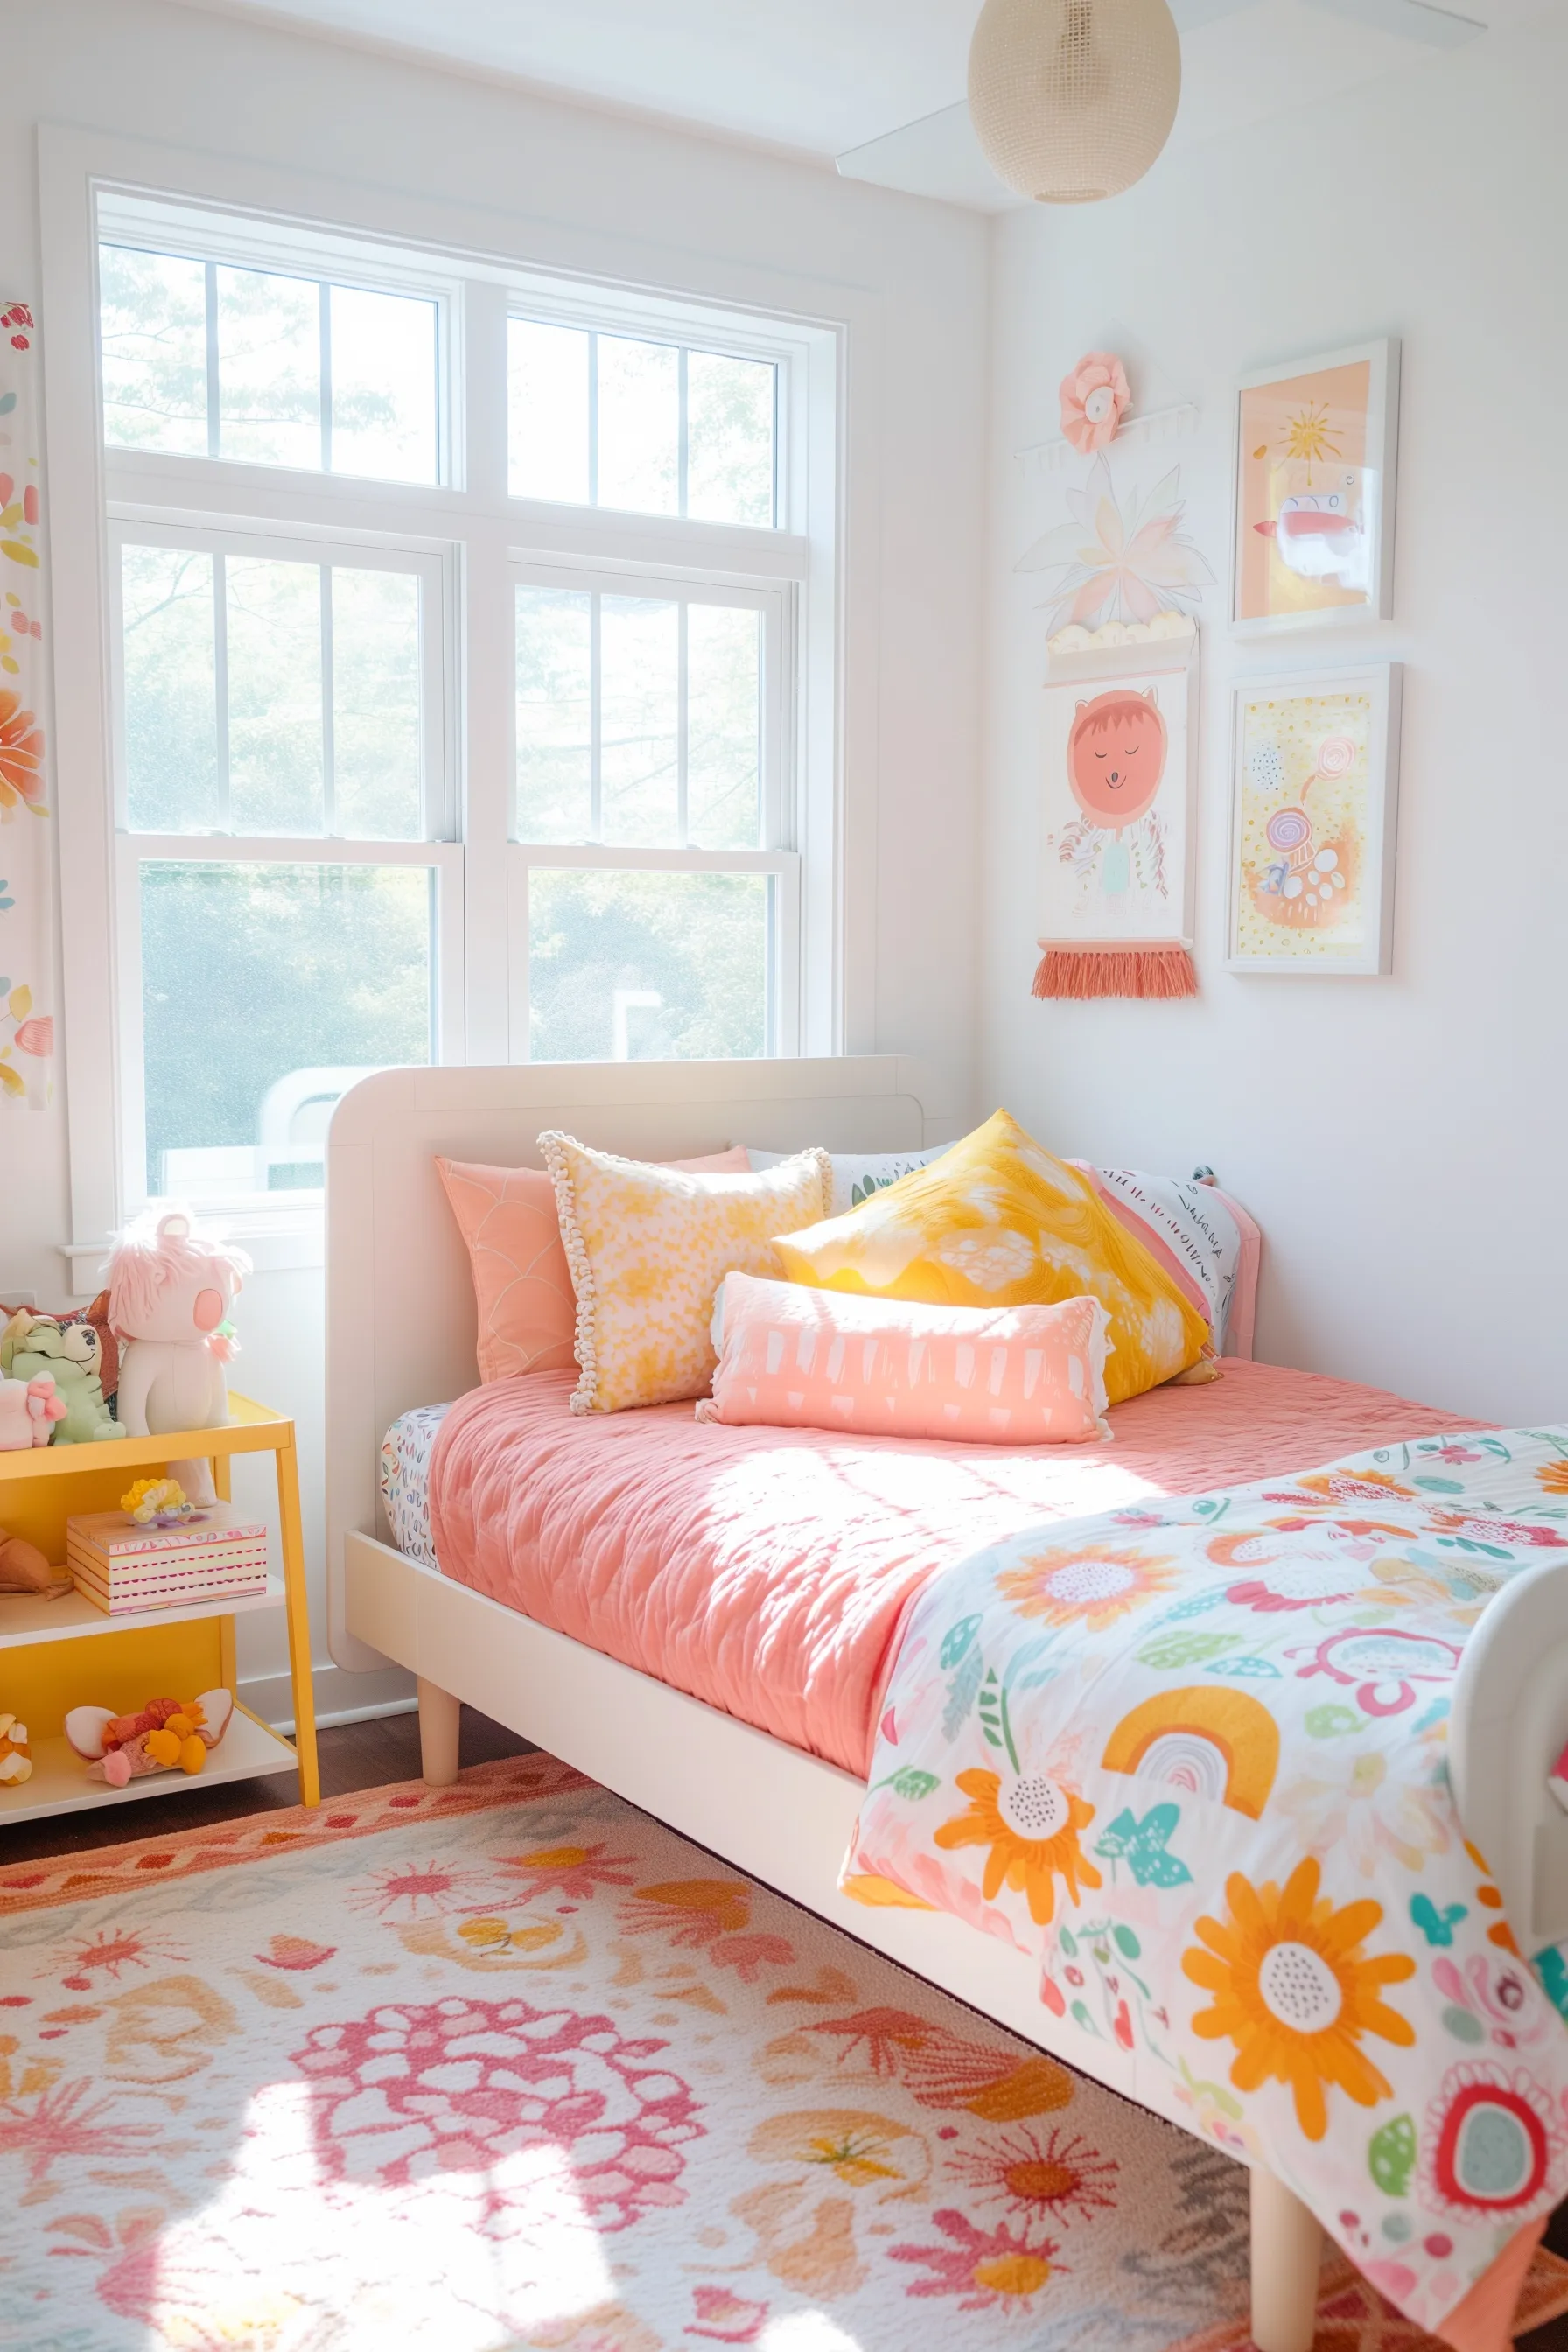 This light pink girls room is a cute and fun way to create a beautiful room on a tight budget. It has pink accents around the room like a pink duvet and pink lighting. There is also lots of flowers and prints